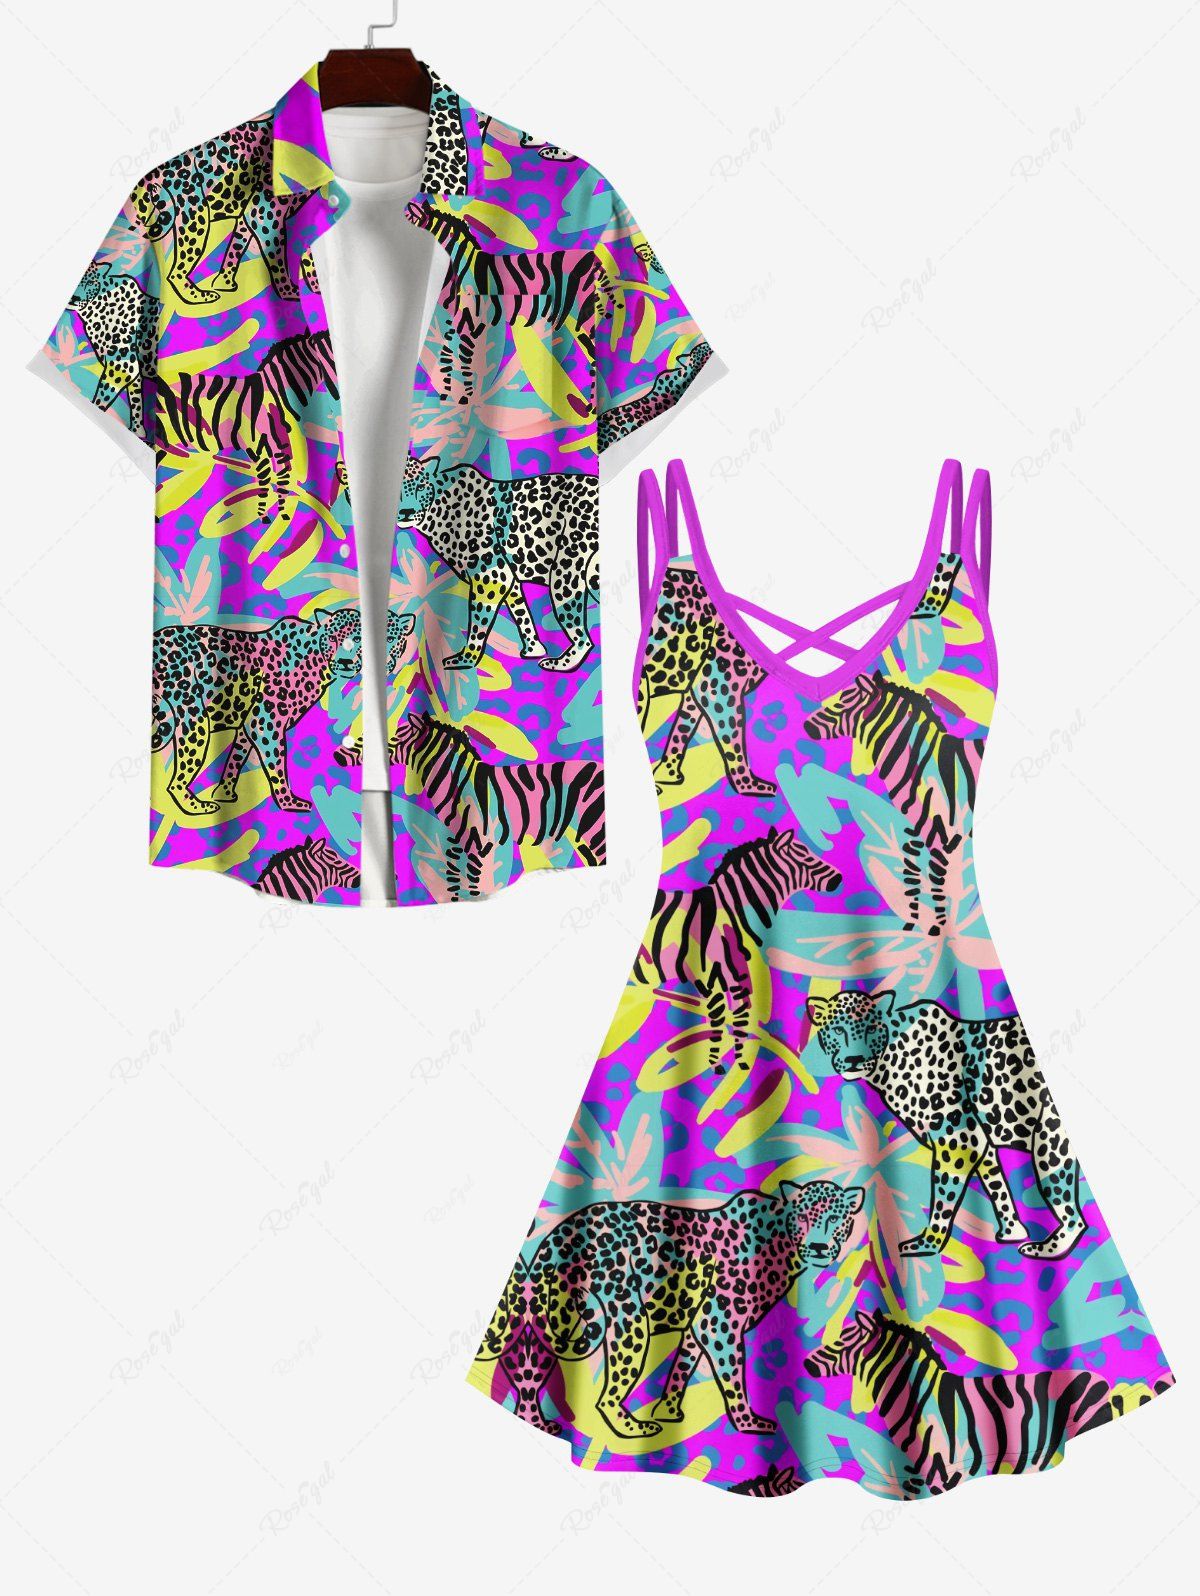 Best Vacation Style Leaf Leopard Zebra Printed Plus Size Hawaii Beach Outfit for Couples  